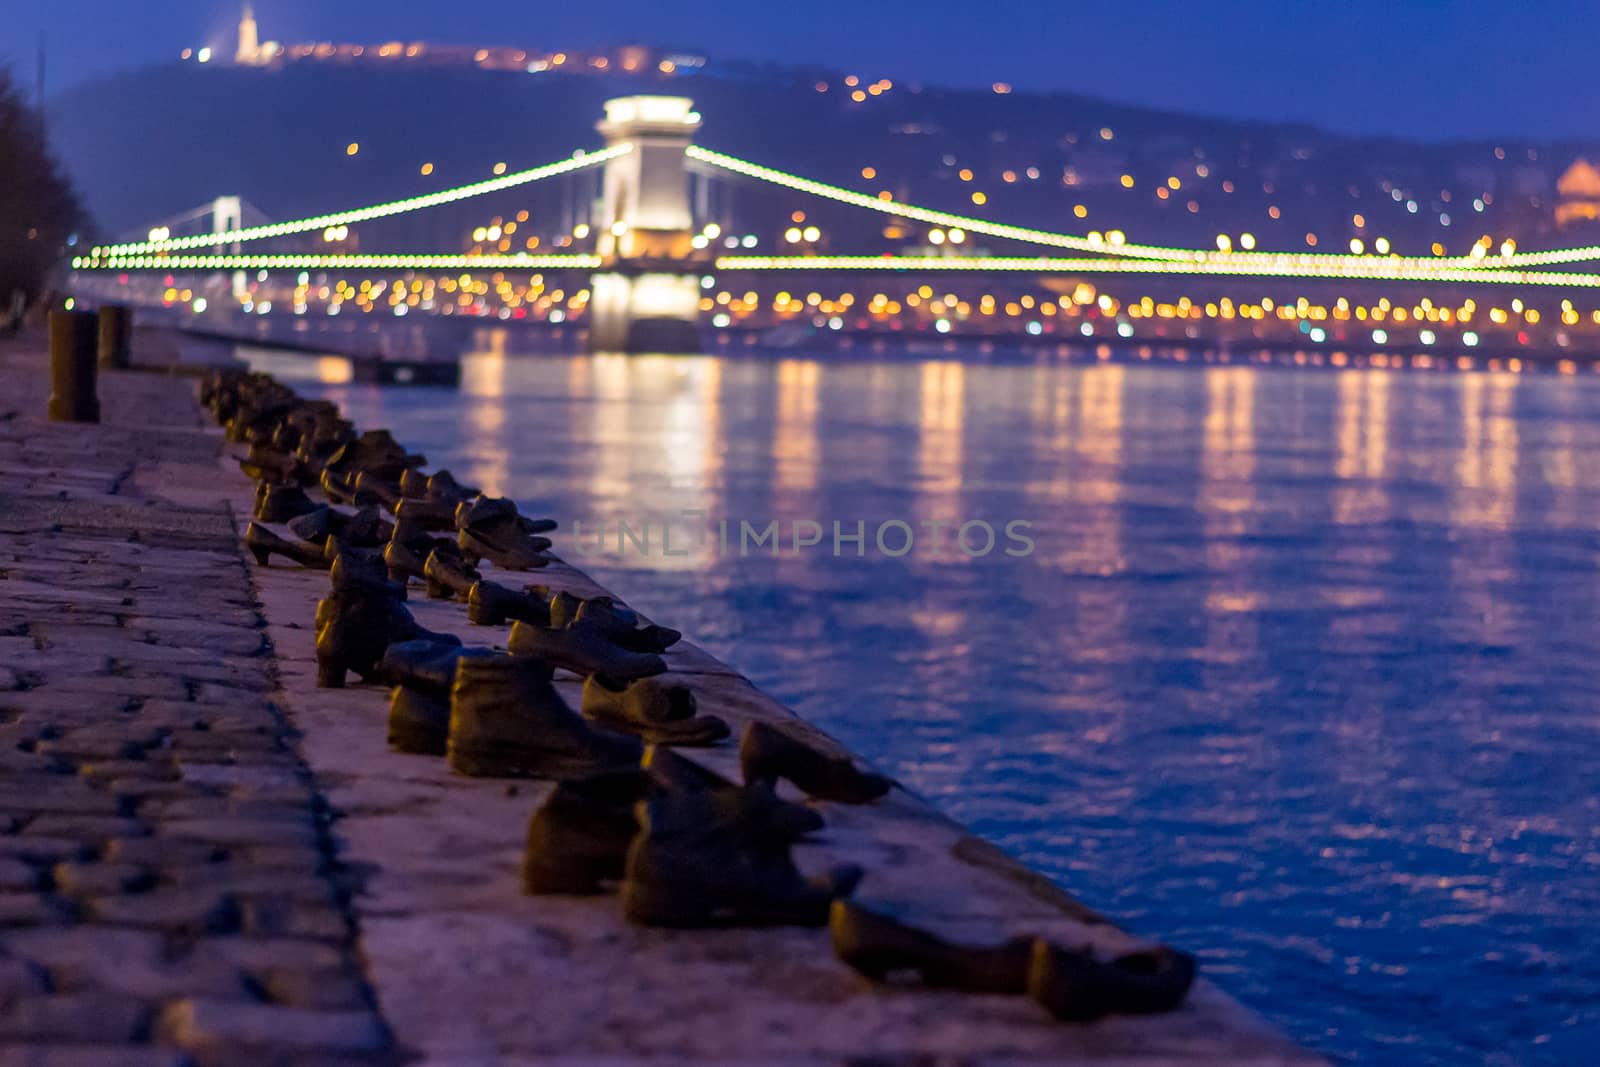 Budapest, Hungary: shoes on the danube monument at night chain bridge and city skyline in the background by kb79